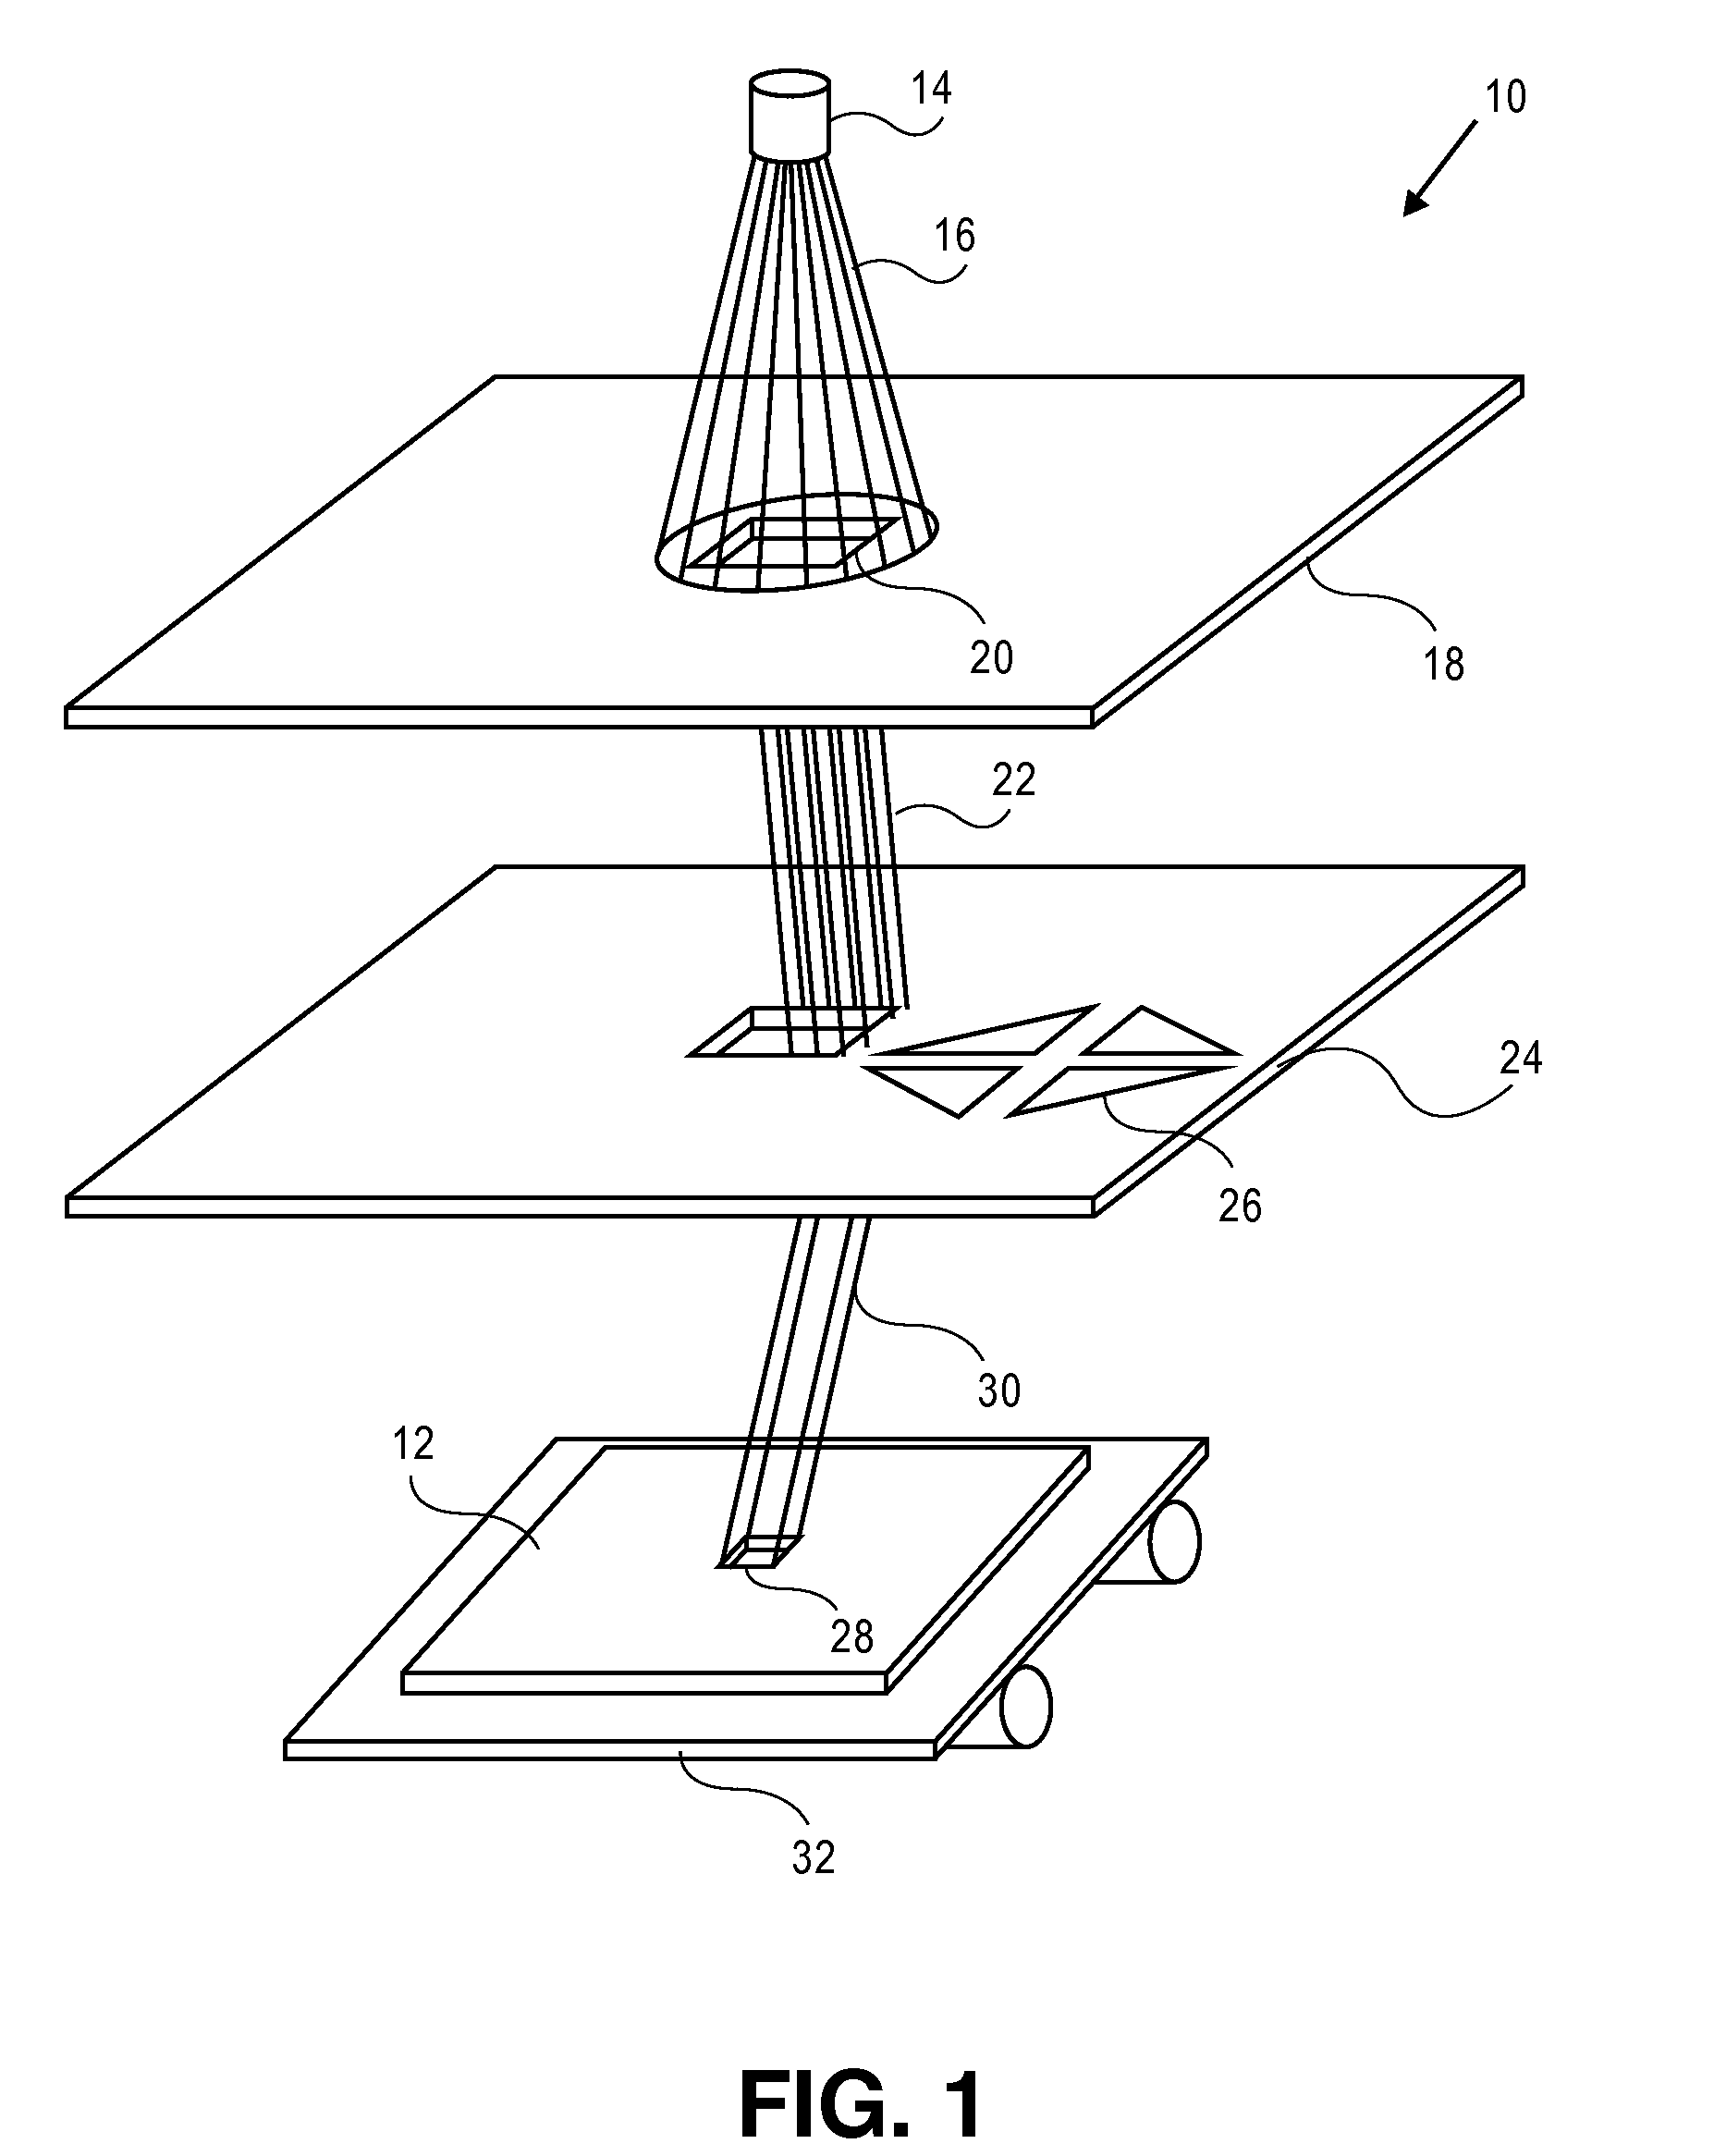 Method and System for Design of a Reticle to be Manufactured Using Variable Shaped Beam Lithography